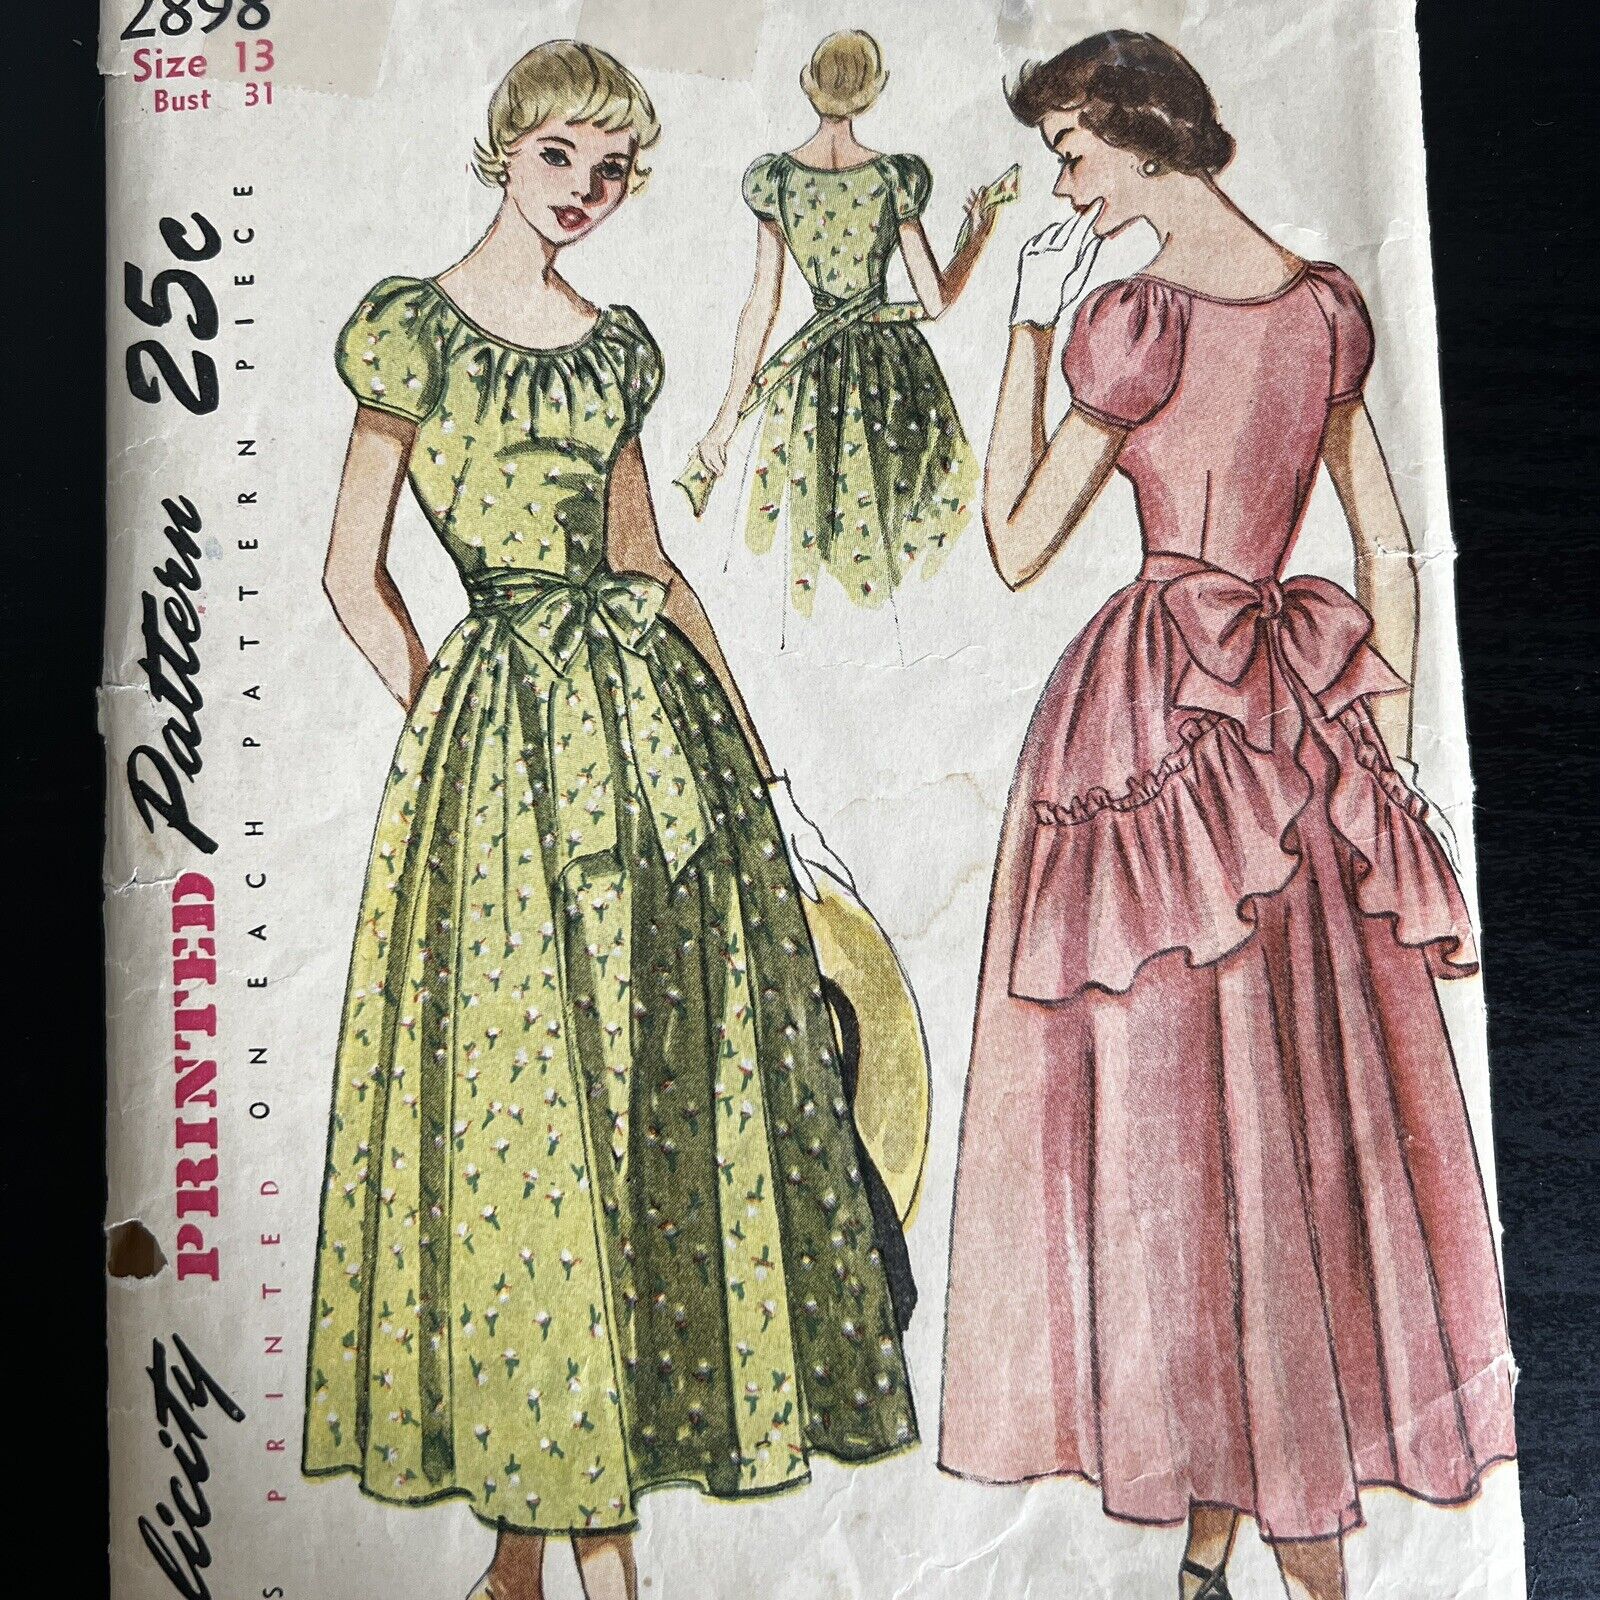 Vintage 1940s Simplicity 2898 Puff Sleeve Bustle Dress Sewing Pattern 13 XS CUT